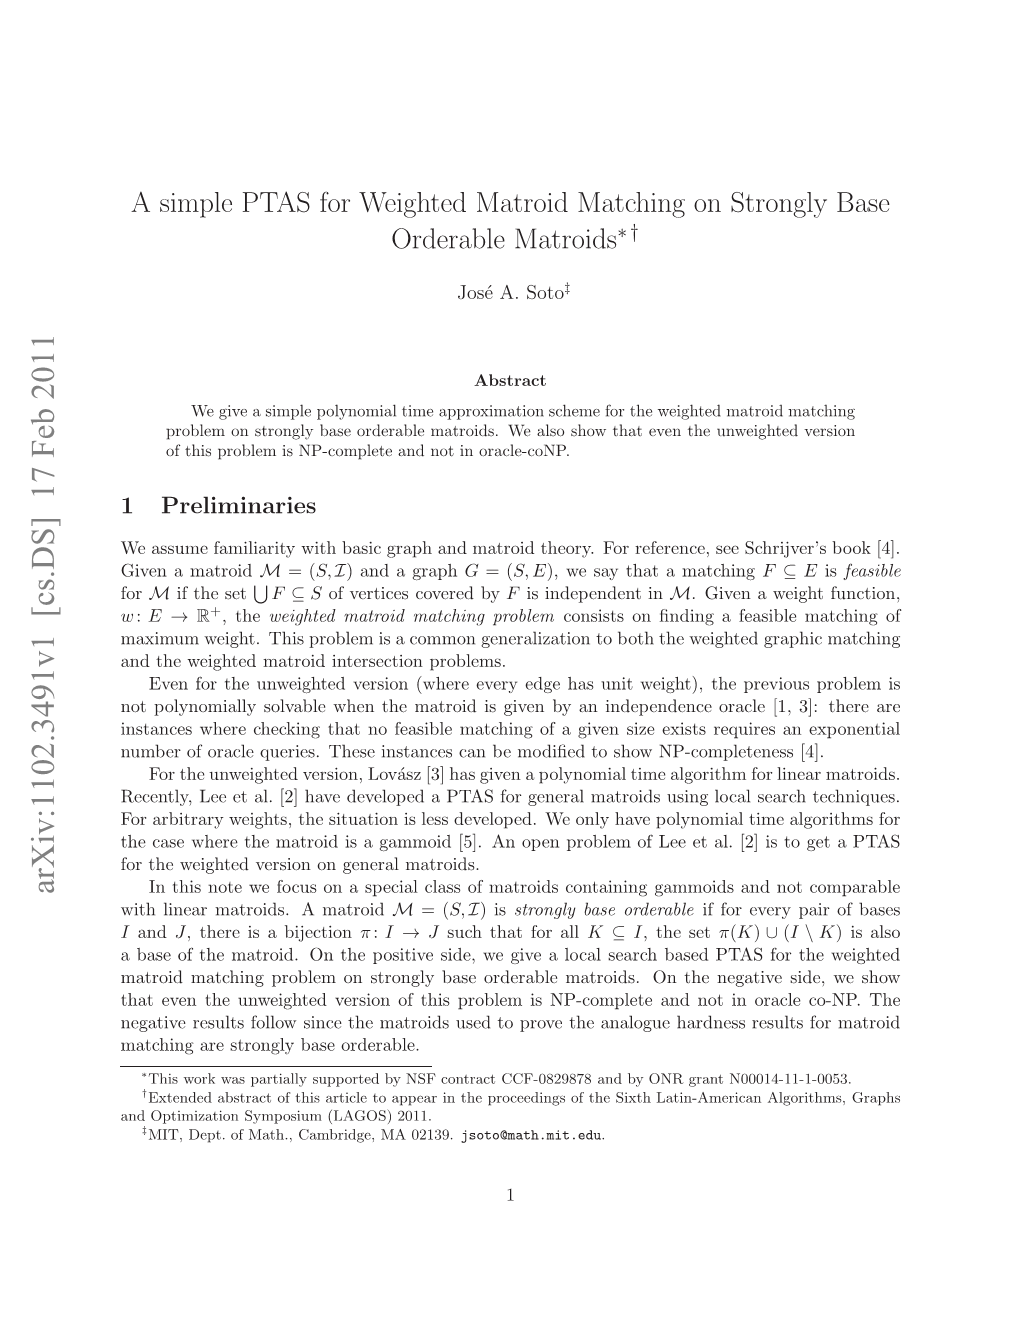 A Simple PTAS for Weighted Matroid Matching on Strongly Base